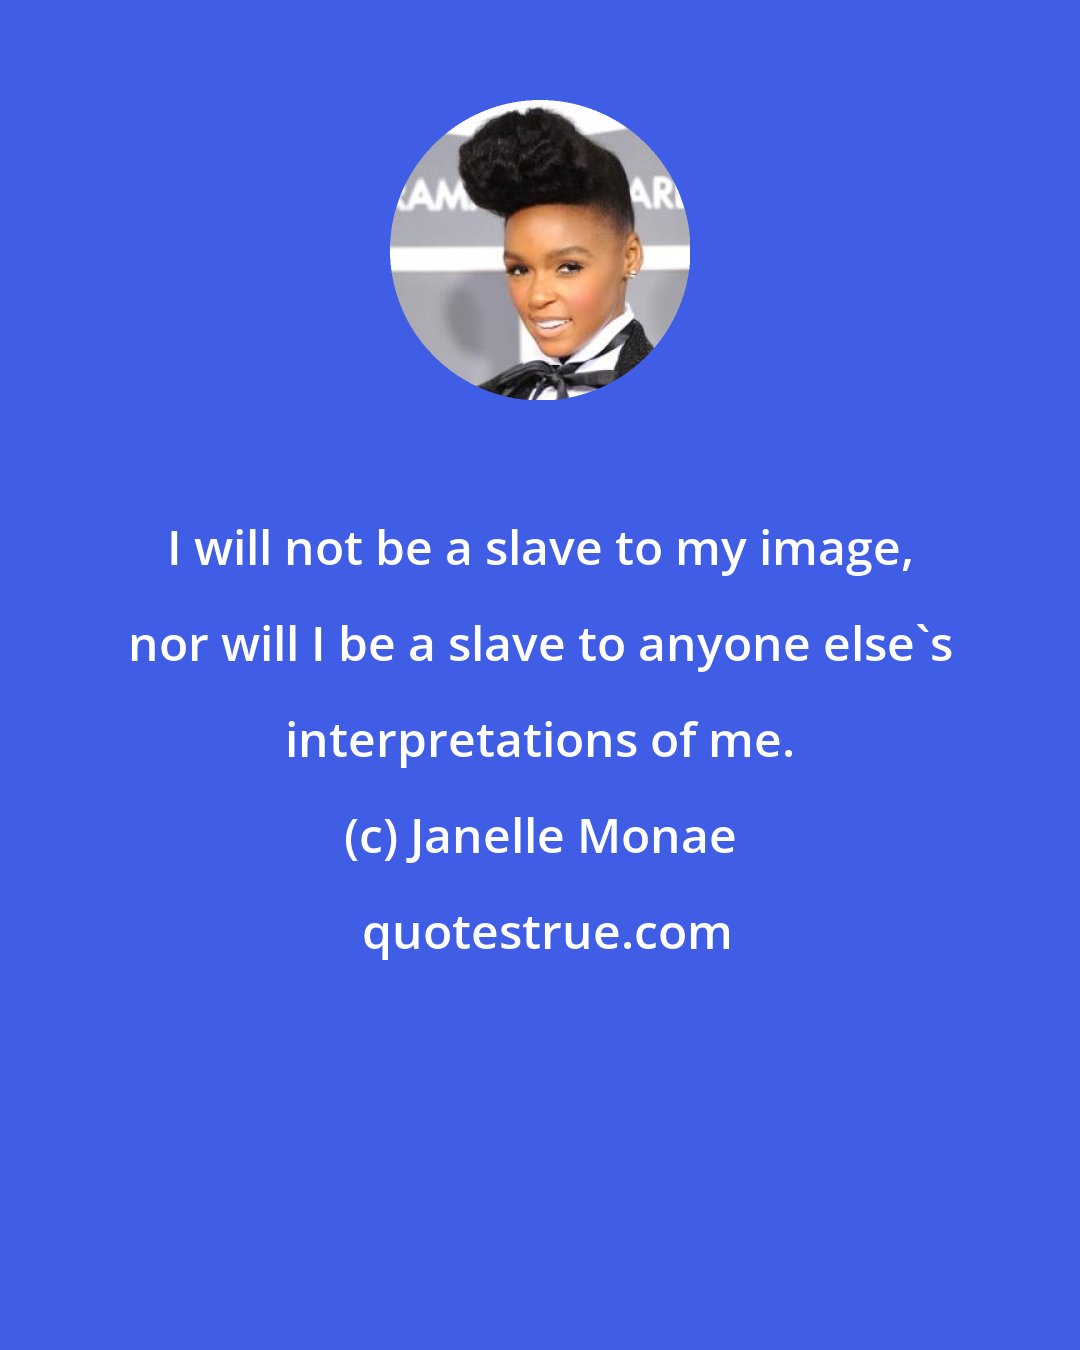 Janelle Monae: I will not be a slave to my image, nor will I be a slave to anyone else's interpretations of me.